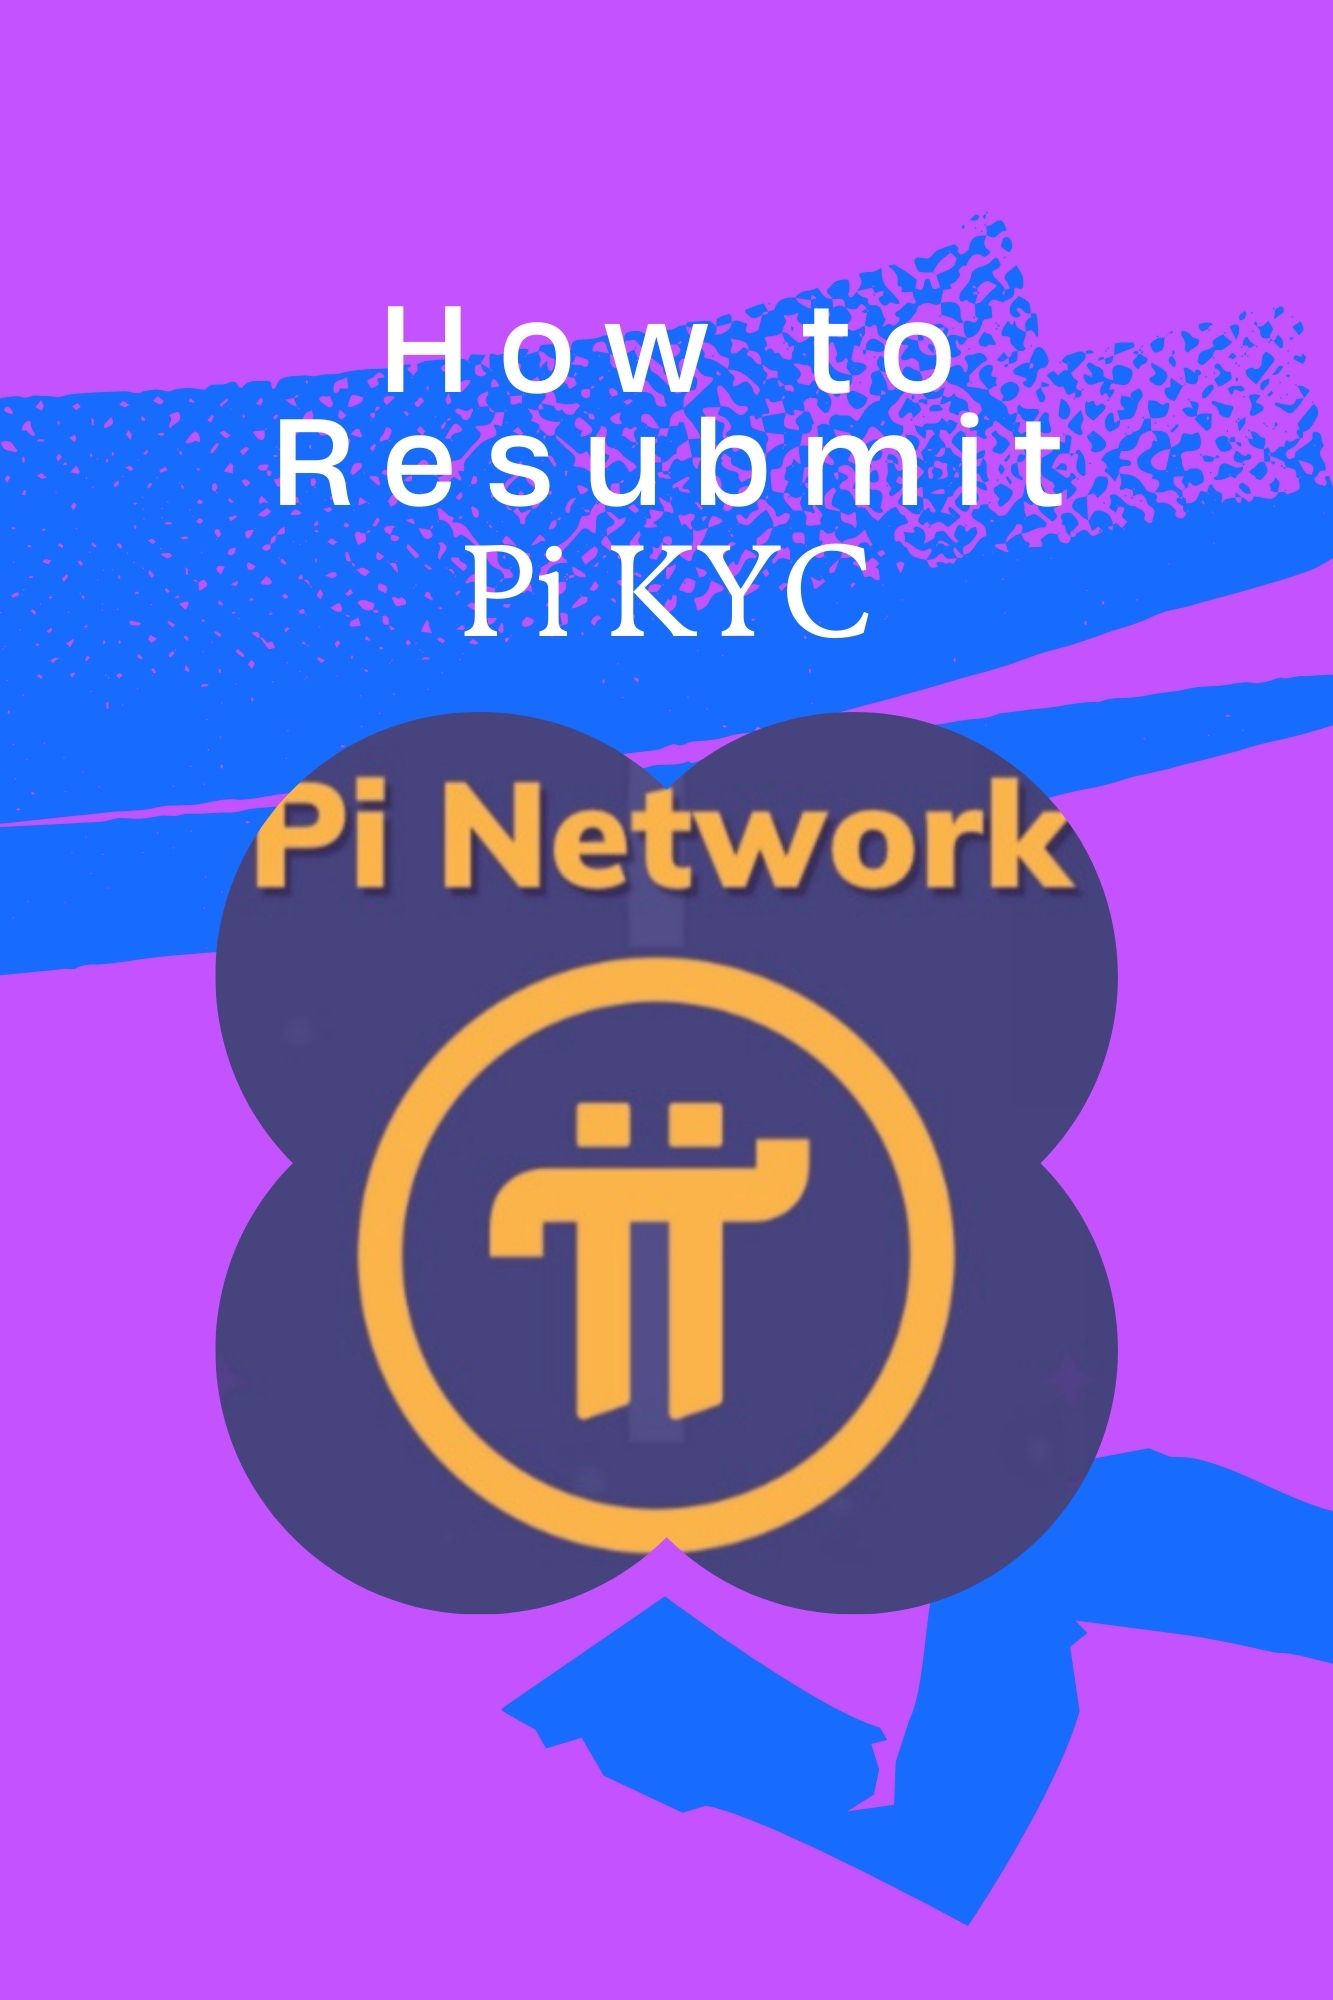 An image showing Pi Network's logo